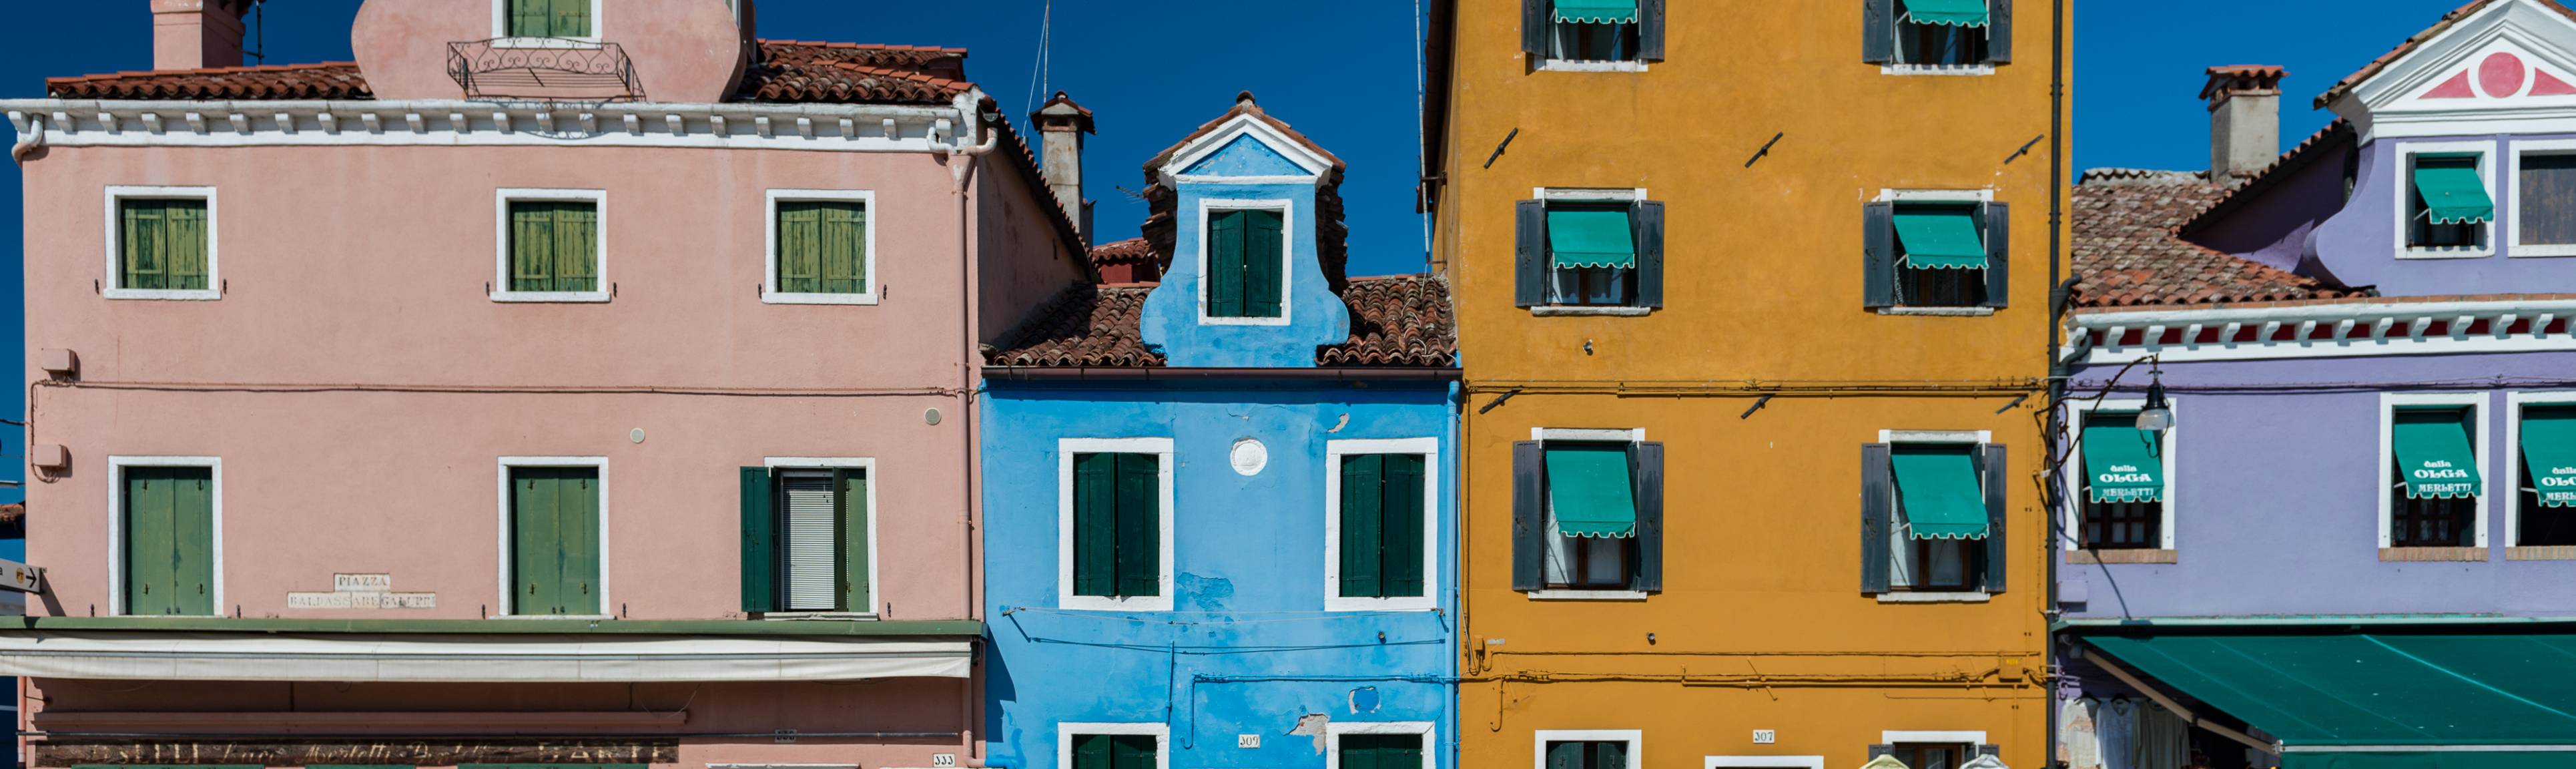 Colorful row of buildings in Burano, Italy